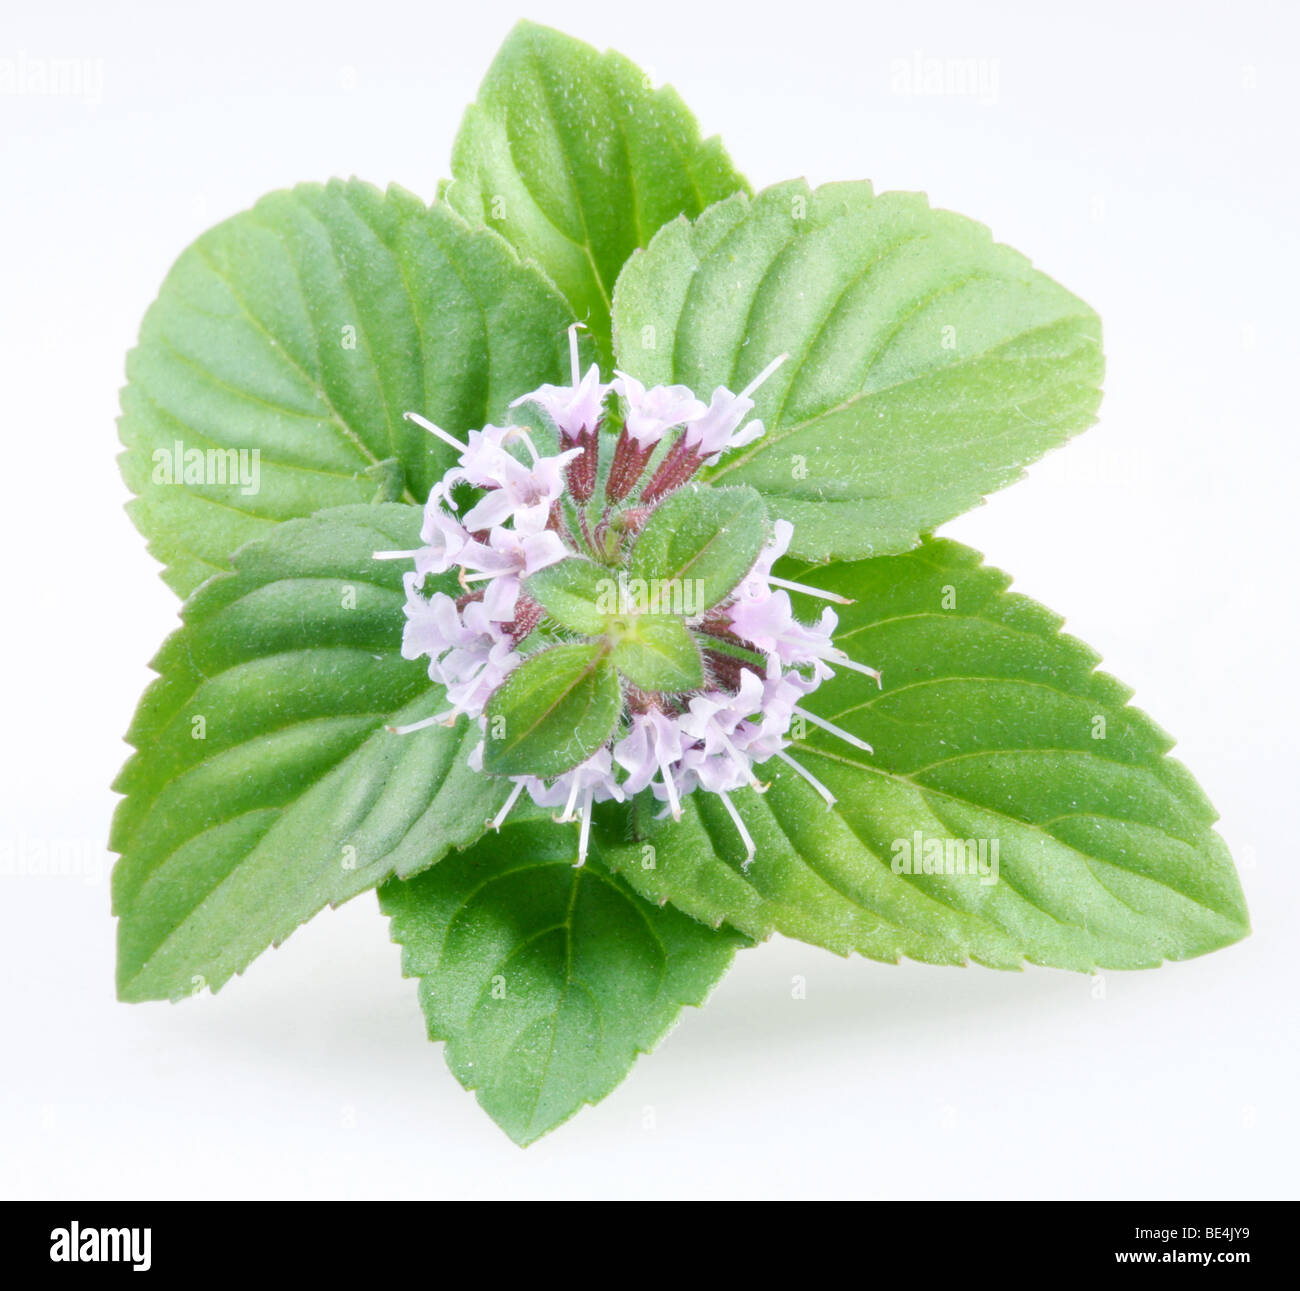 Mint on a white background Stock Photo